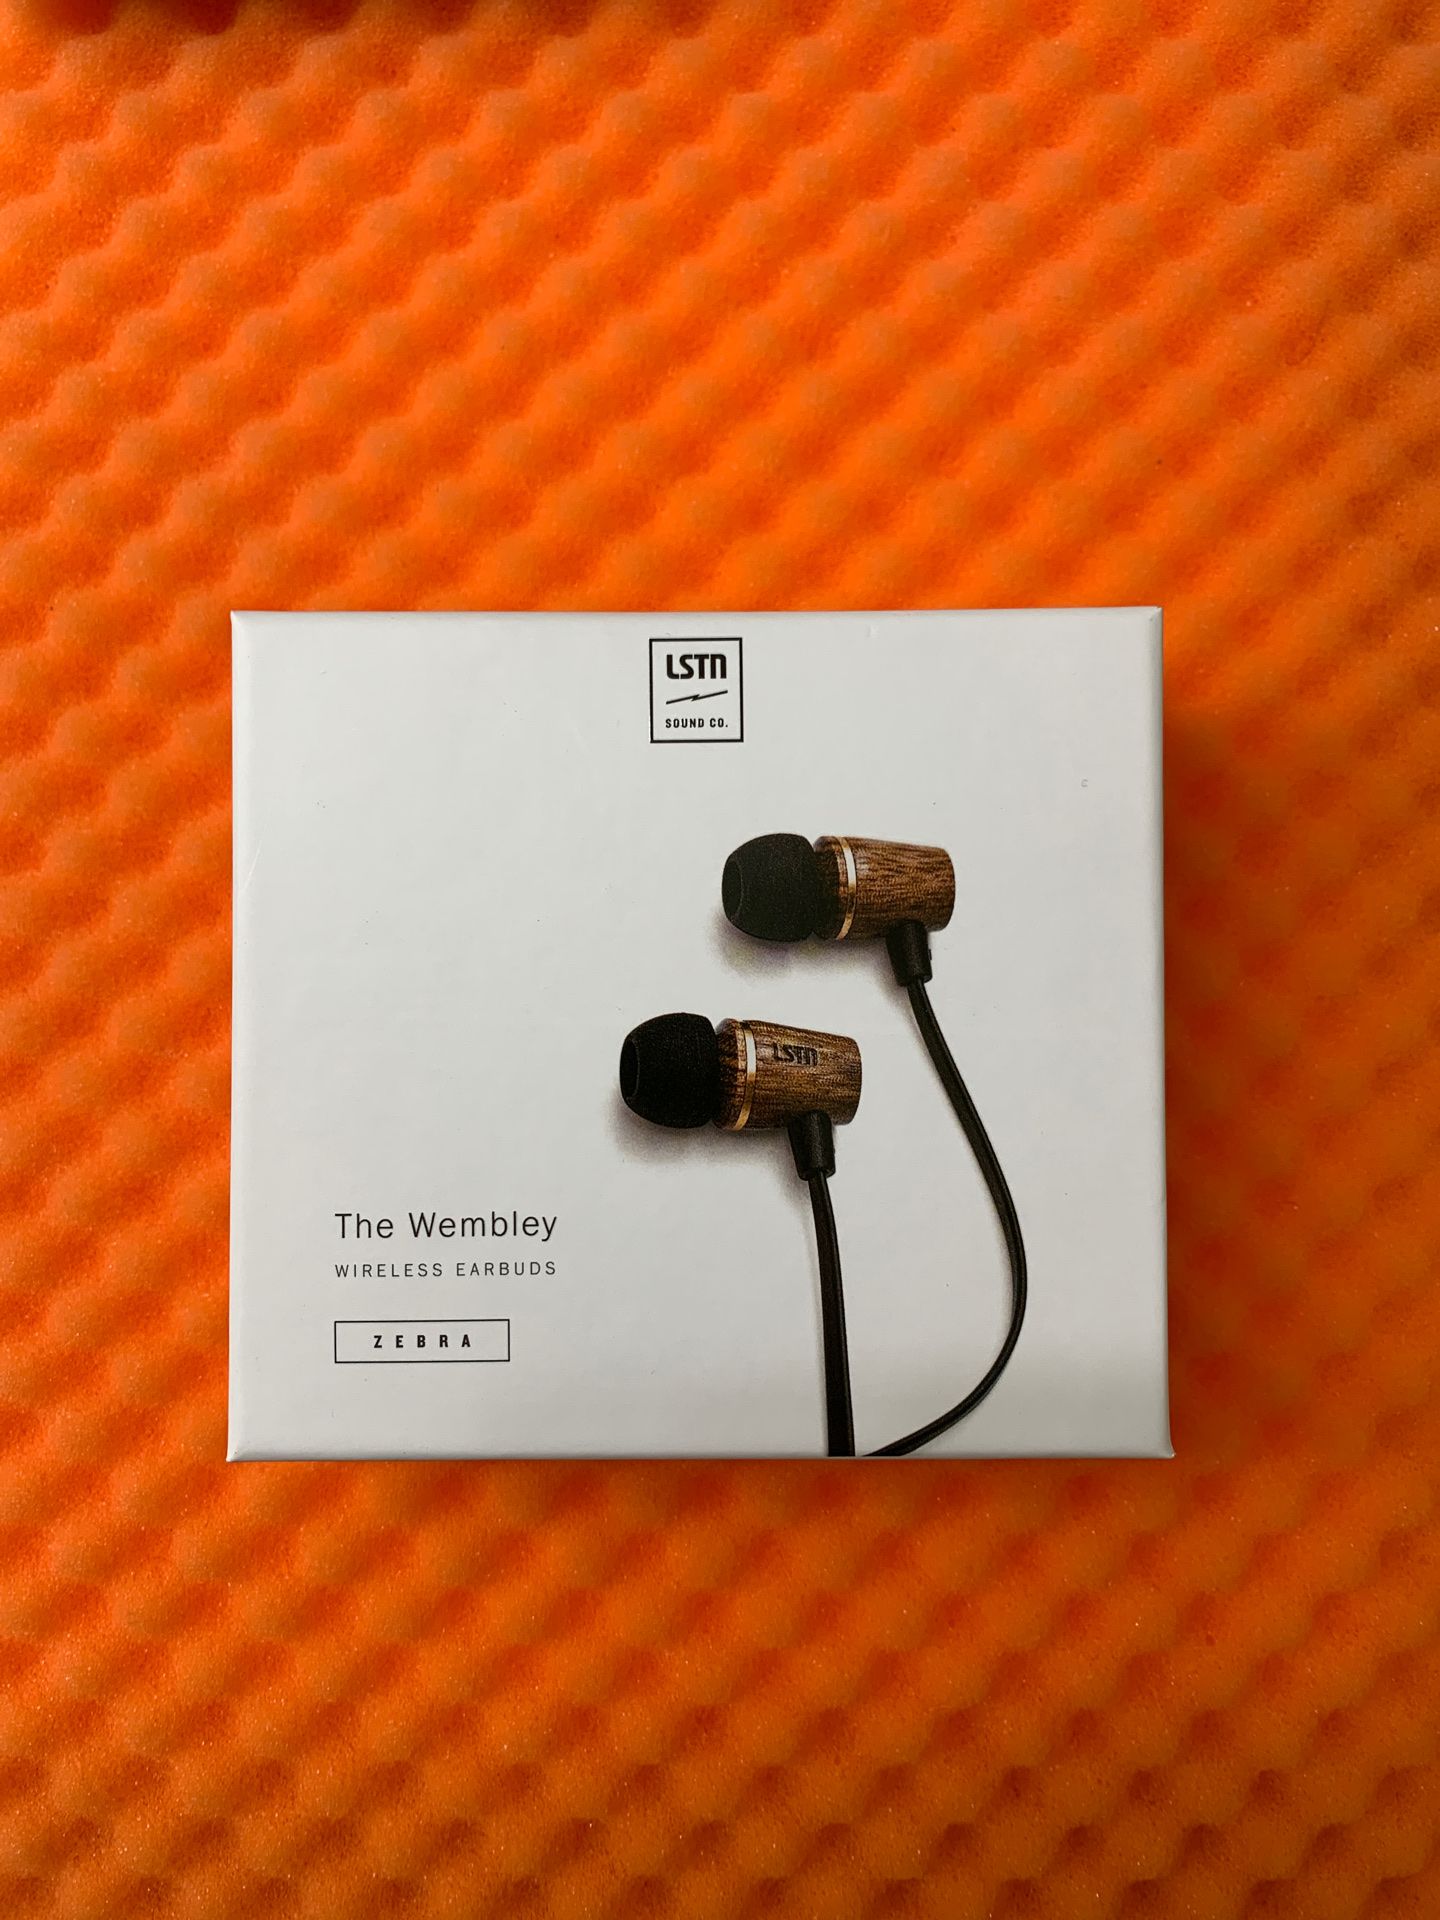 LSTN Sound Company The Wembley Wireless Earbuds